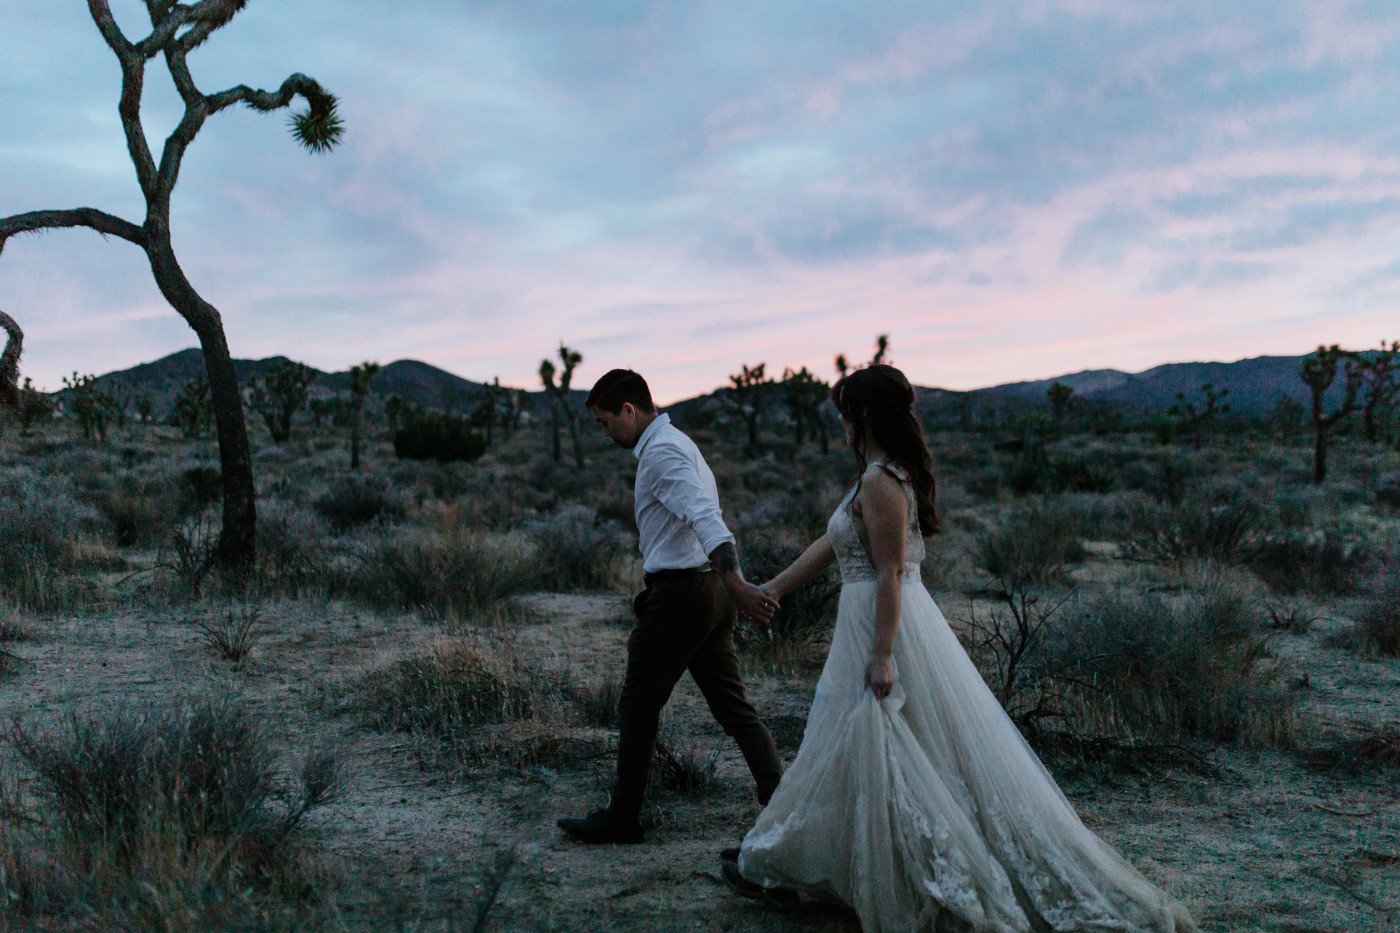 Zack holds Shelby's hand as they walk at sunset through Joshua Tree National Park.